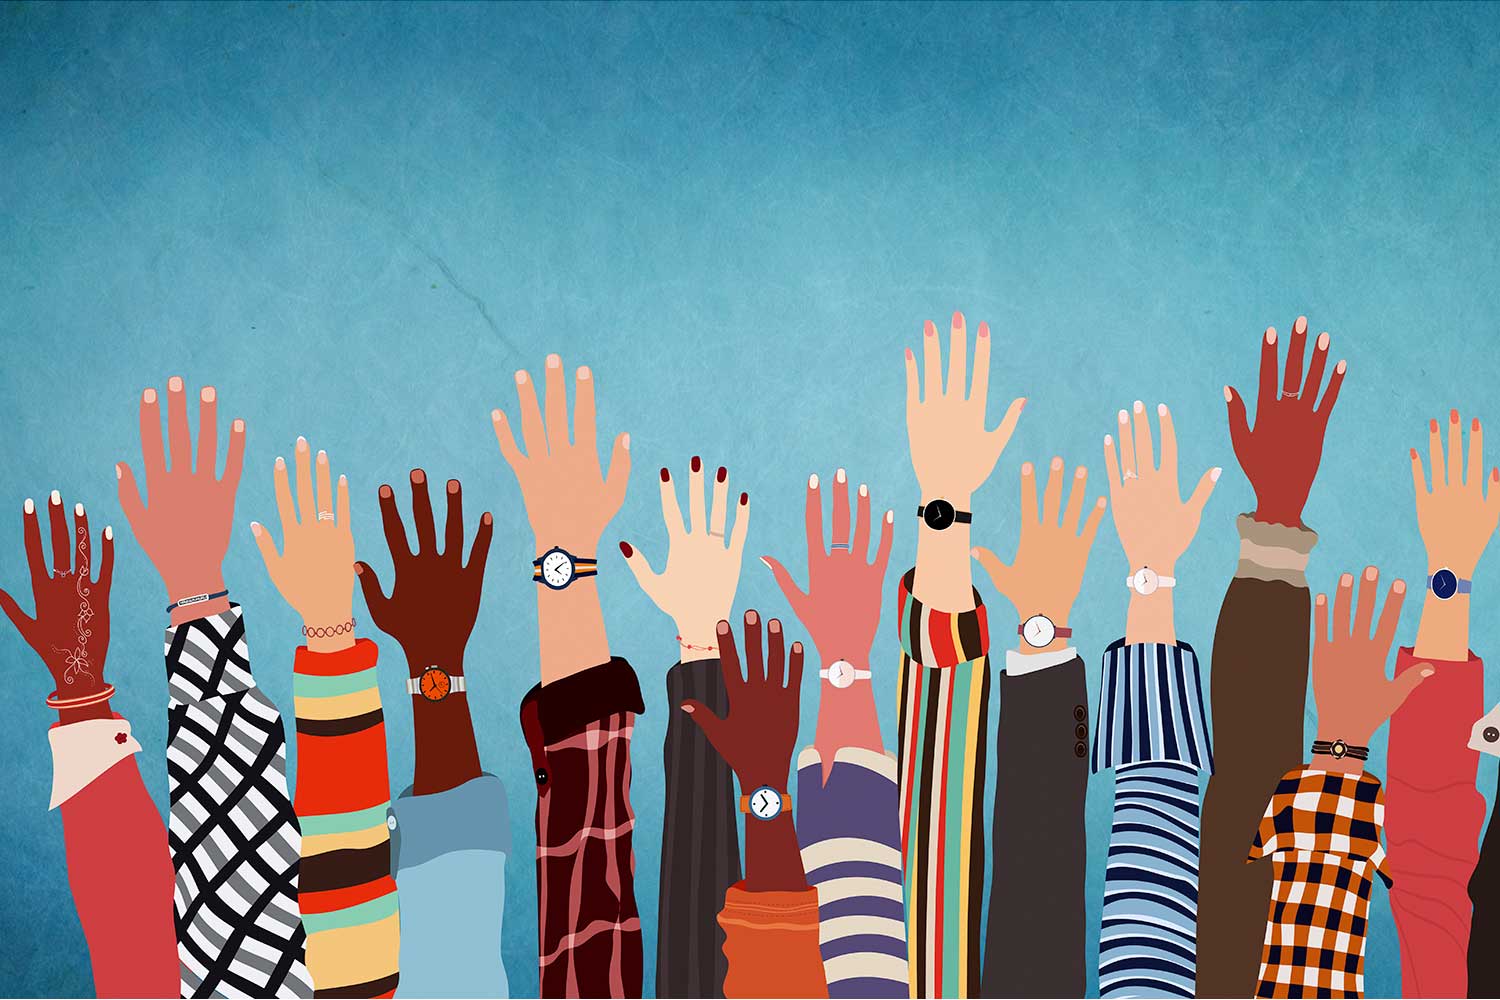 Illustration of multiple hands raised in the air